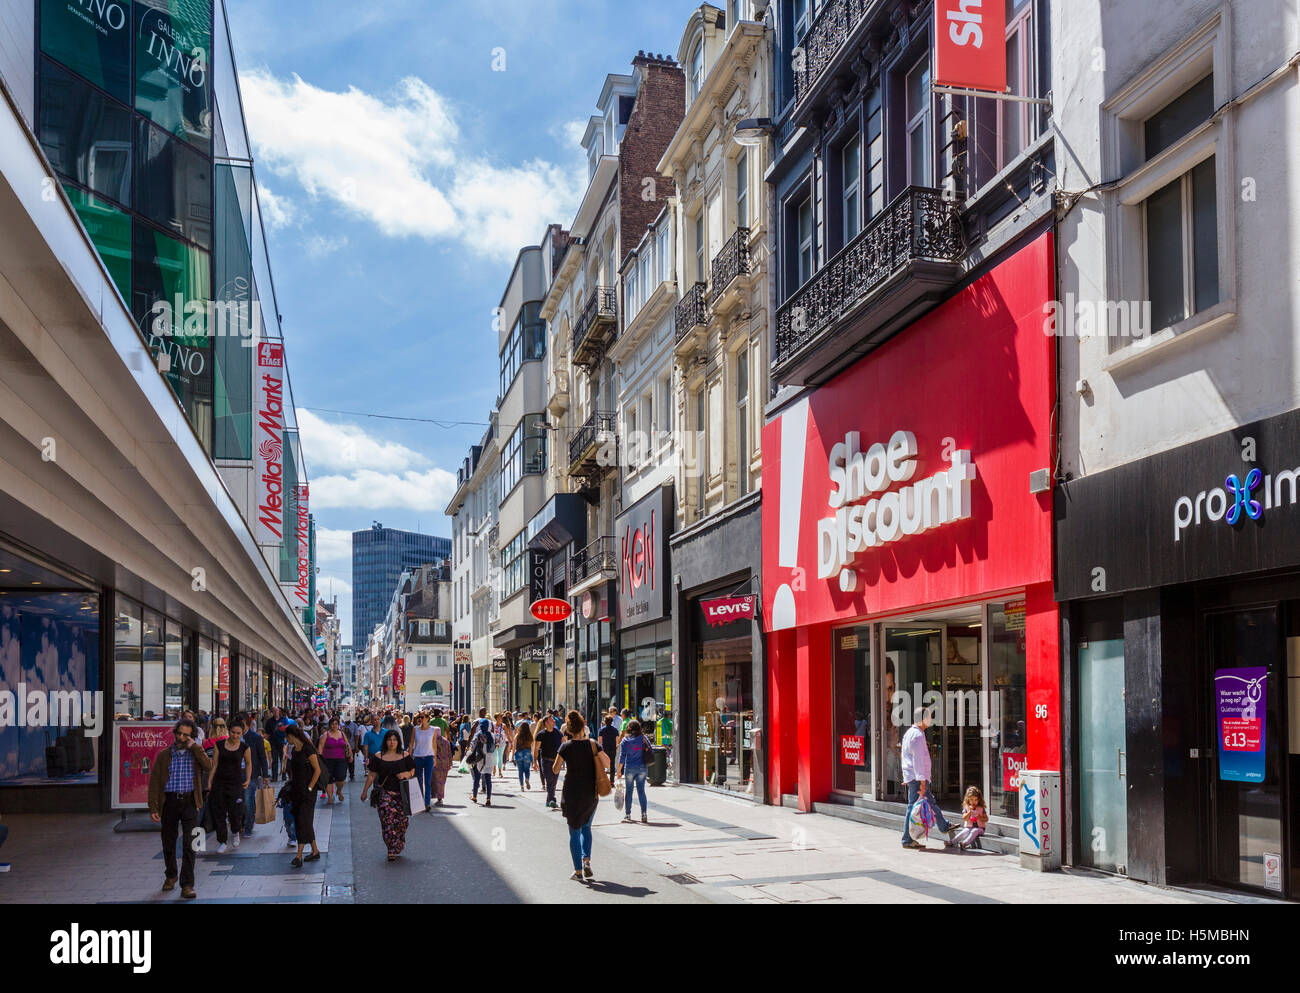 Brussels City Center, Brussels Capital Region - Belgium , Parkway and  Facade of the Galeria Inno and Media Markt Retail Concerns Editorial Stock  Photo - Image of lockdown, 2020: 249118478